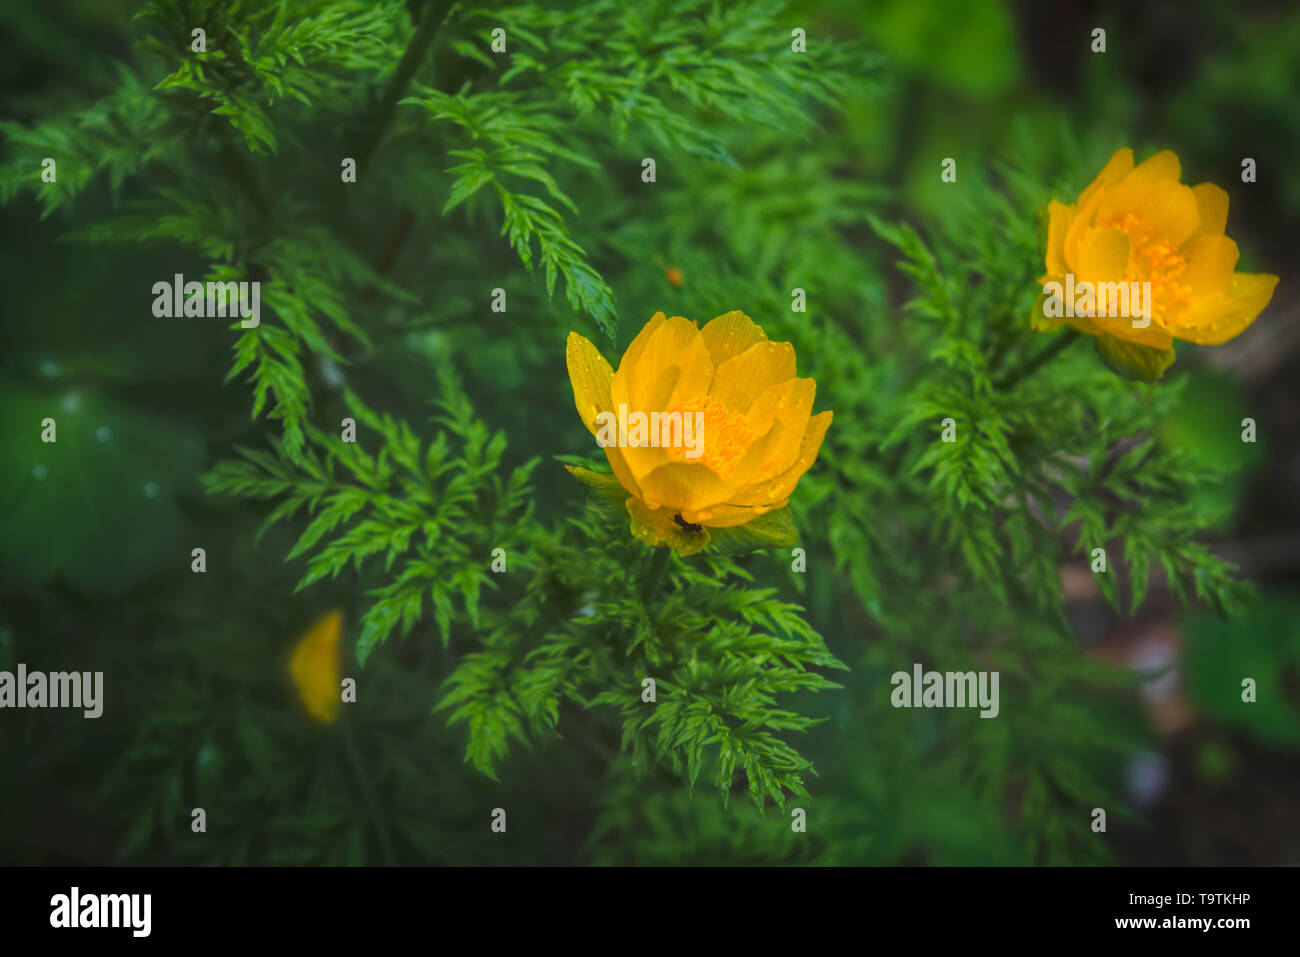 Spring flowers on a blurred background. The globeflower. Yellow flowers Trollius. Stock Photo